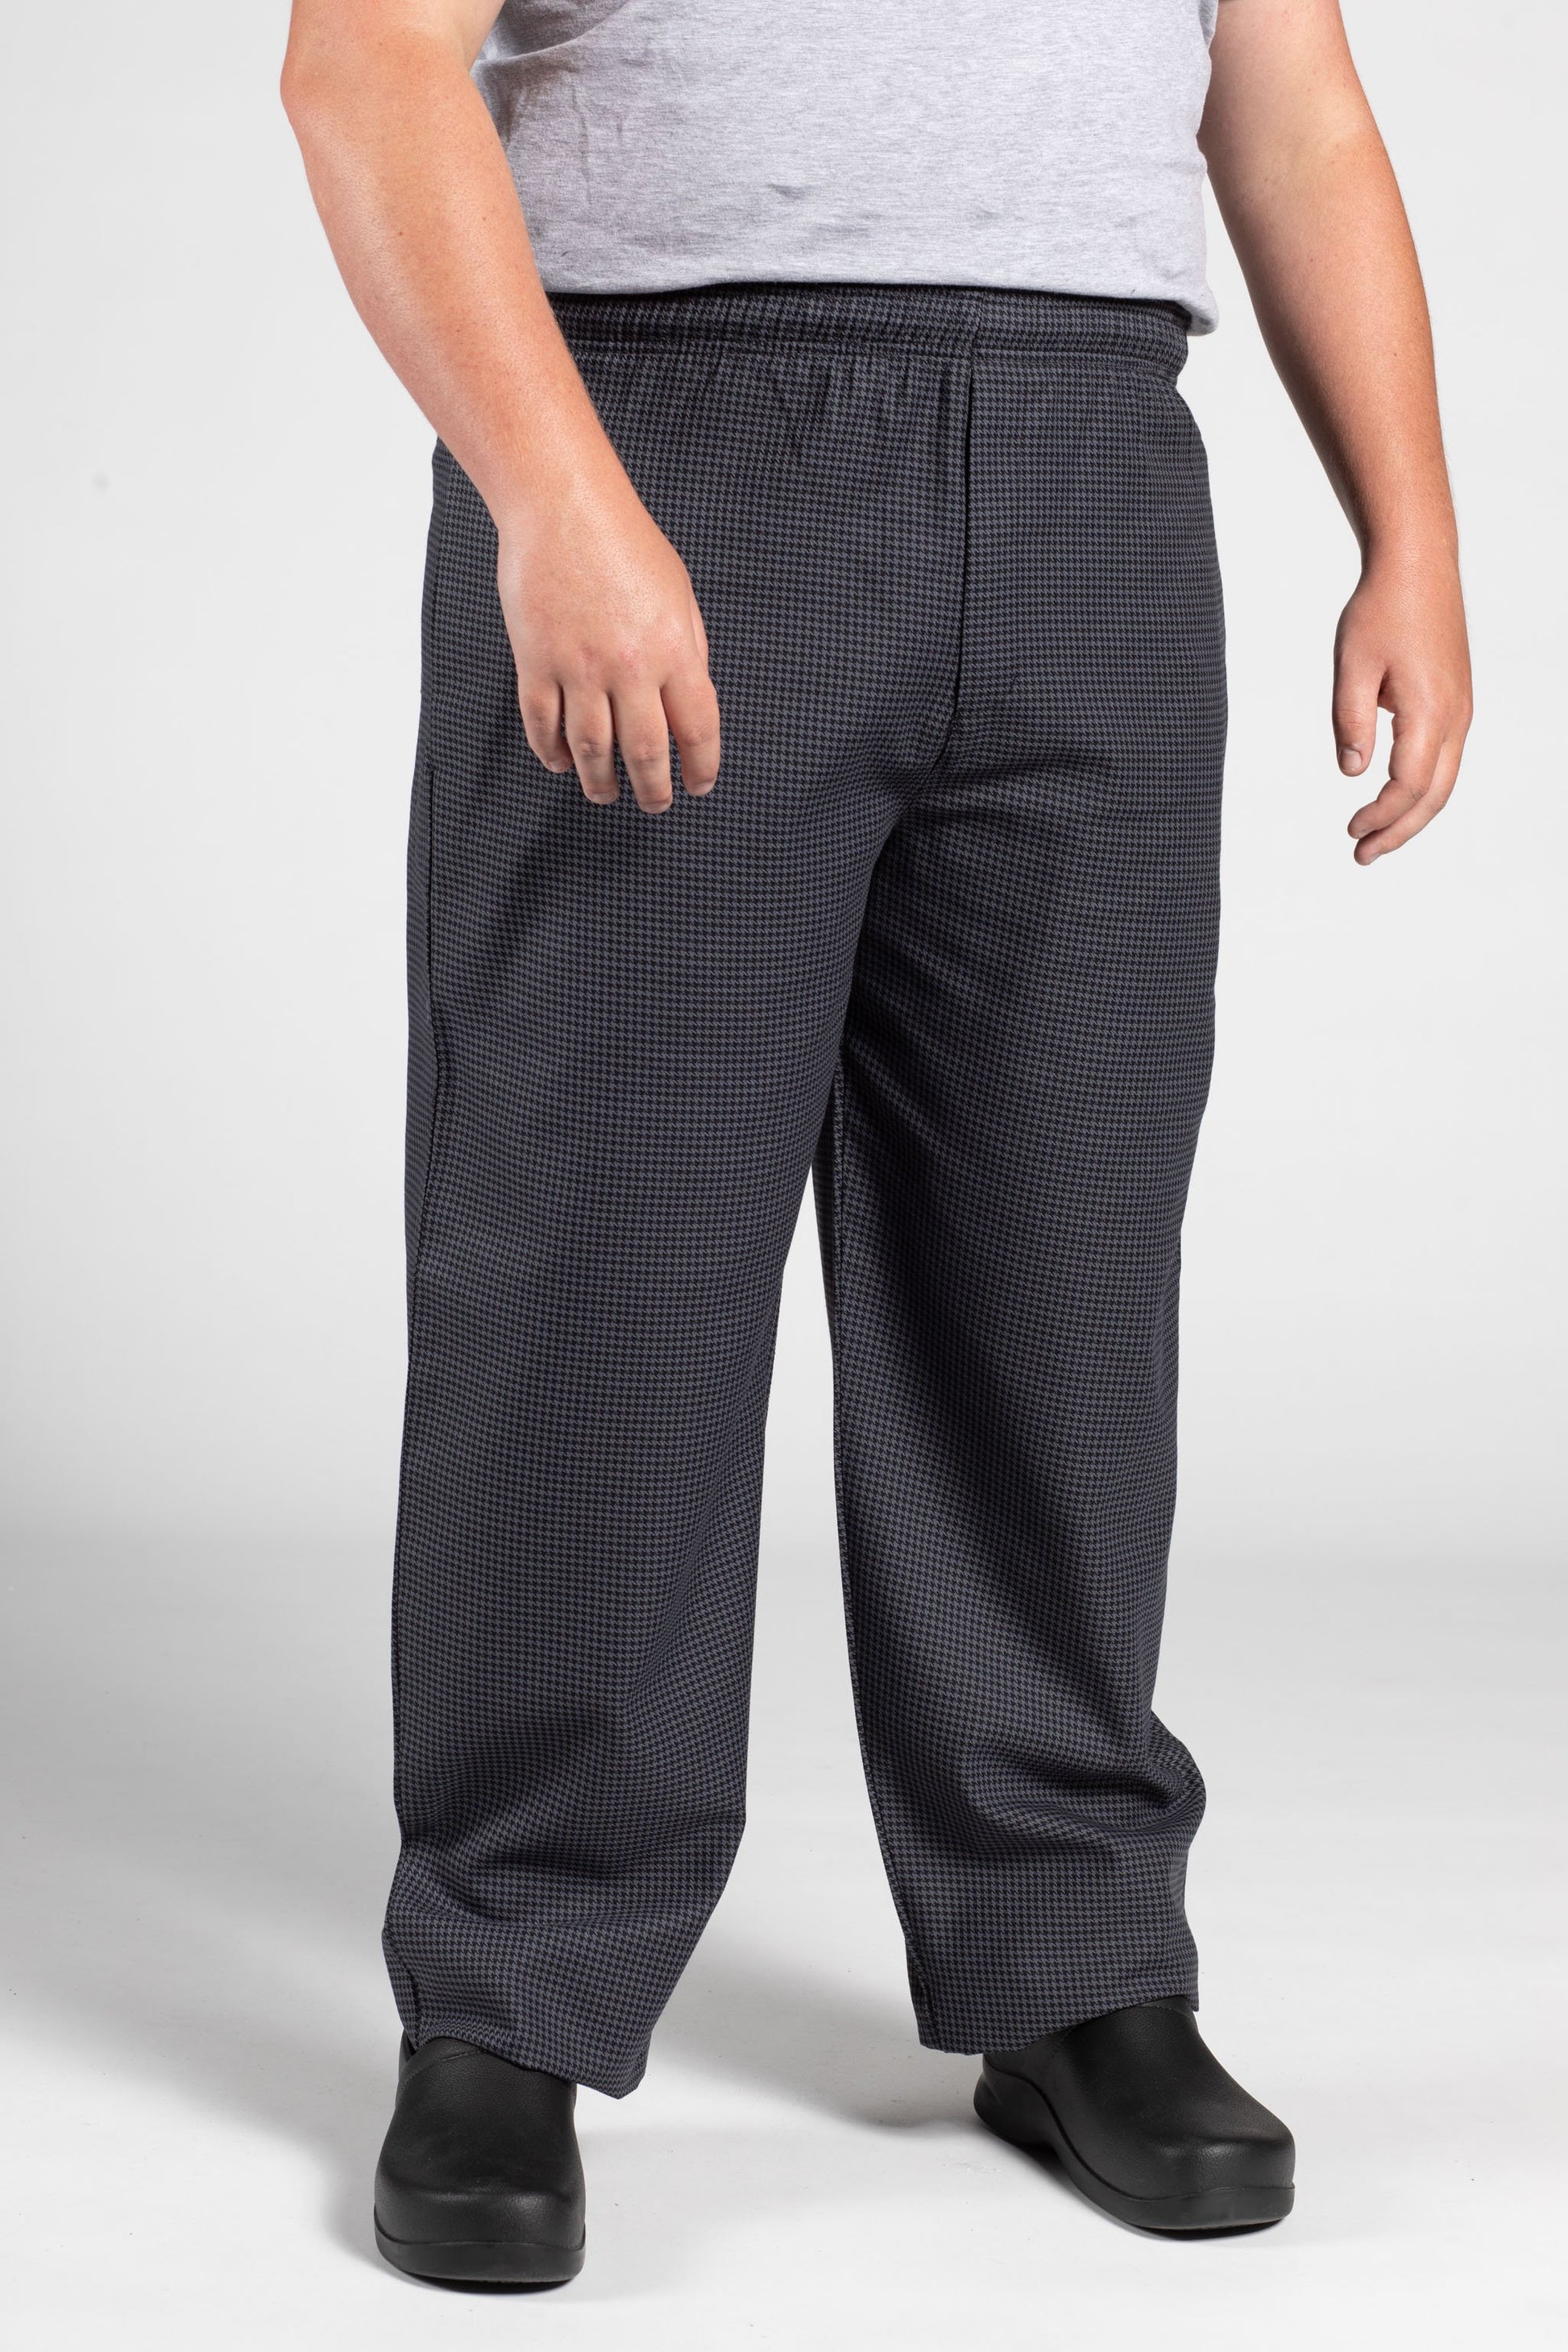 Yarn-Dyed Chef Pant #4003 – Uncommon Chef